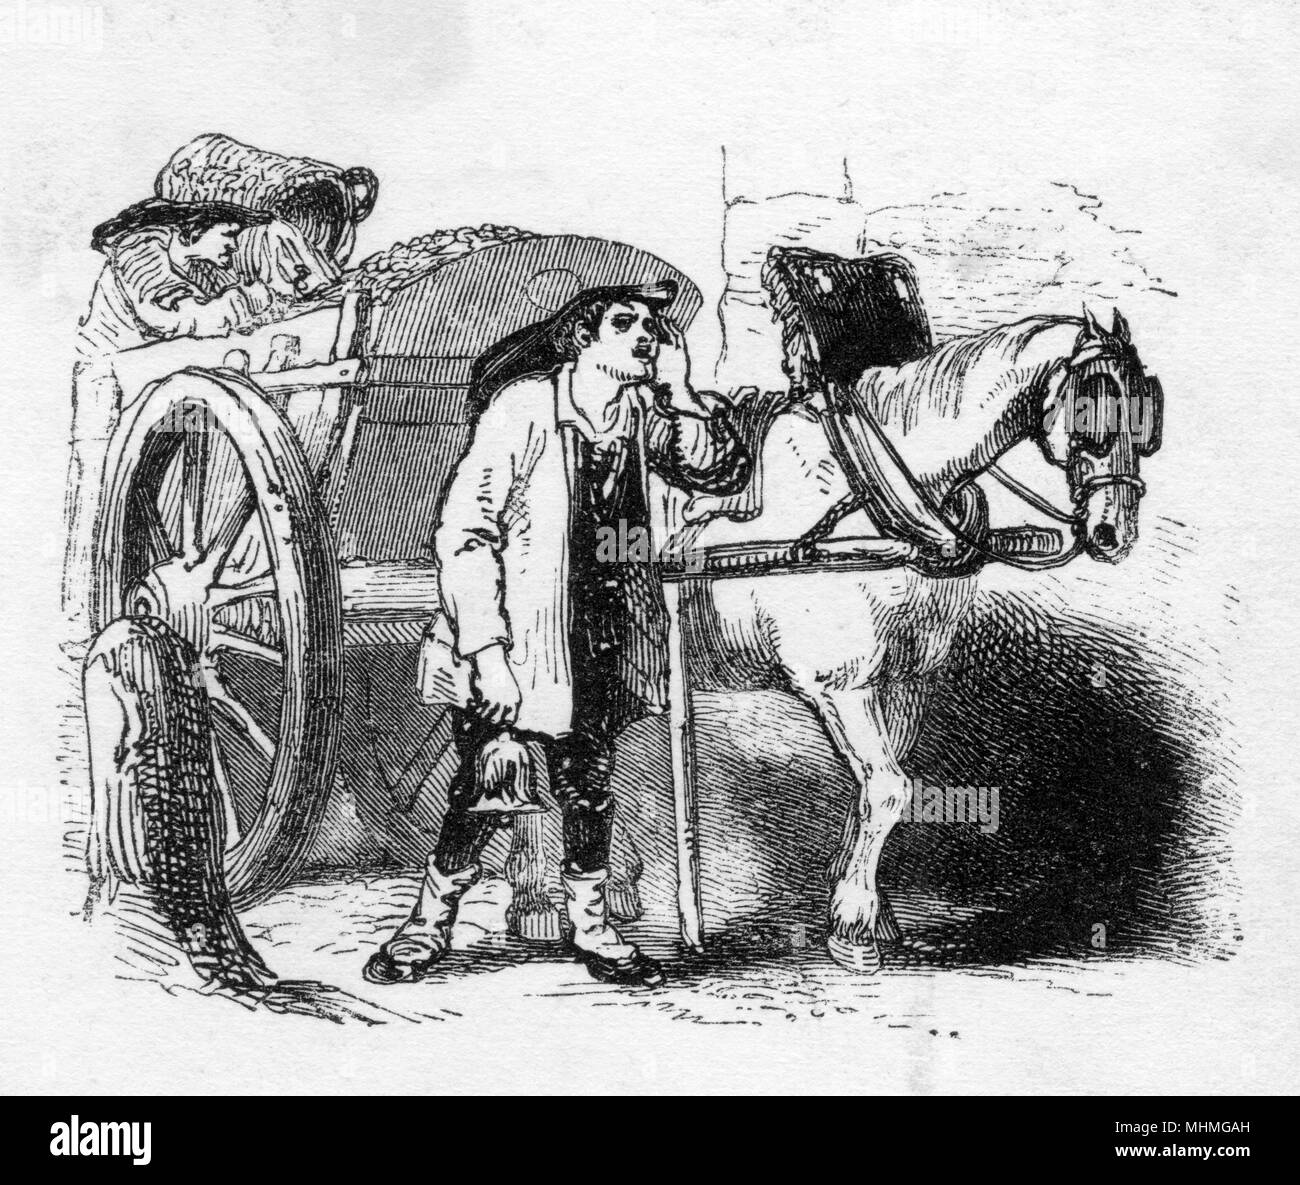 The dustman calls out to householders to bring out their refuse, while his mate tips the buckets into the cart.      Date: circa 1840 Stock Photo